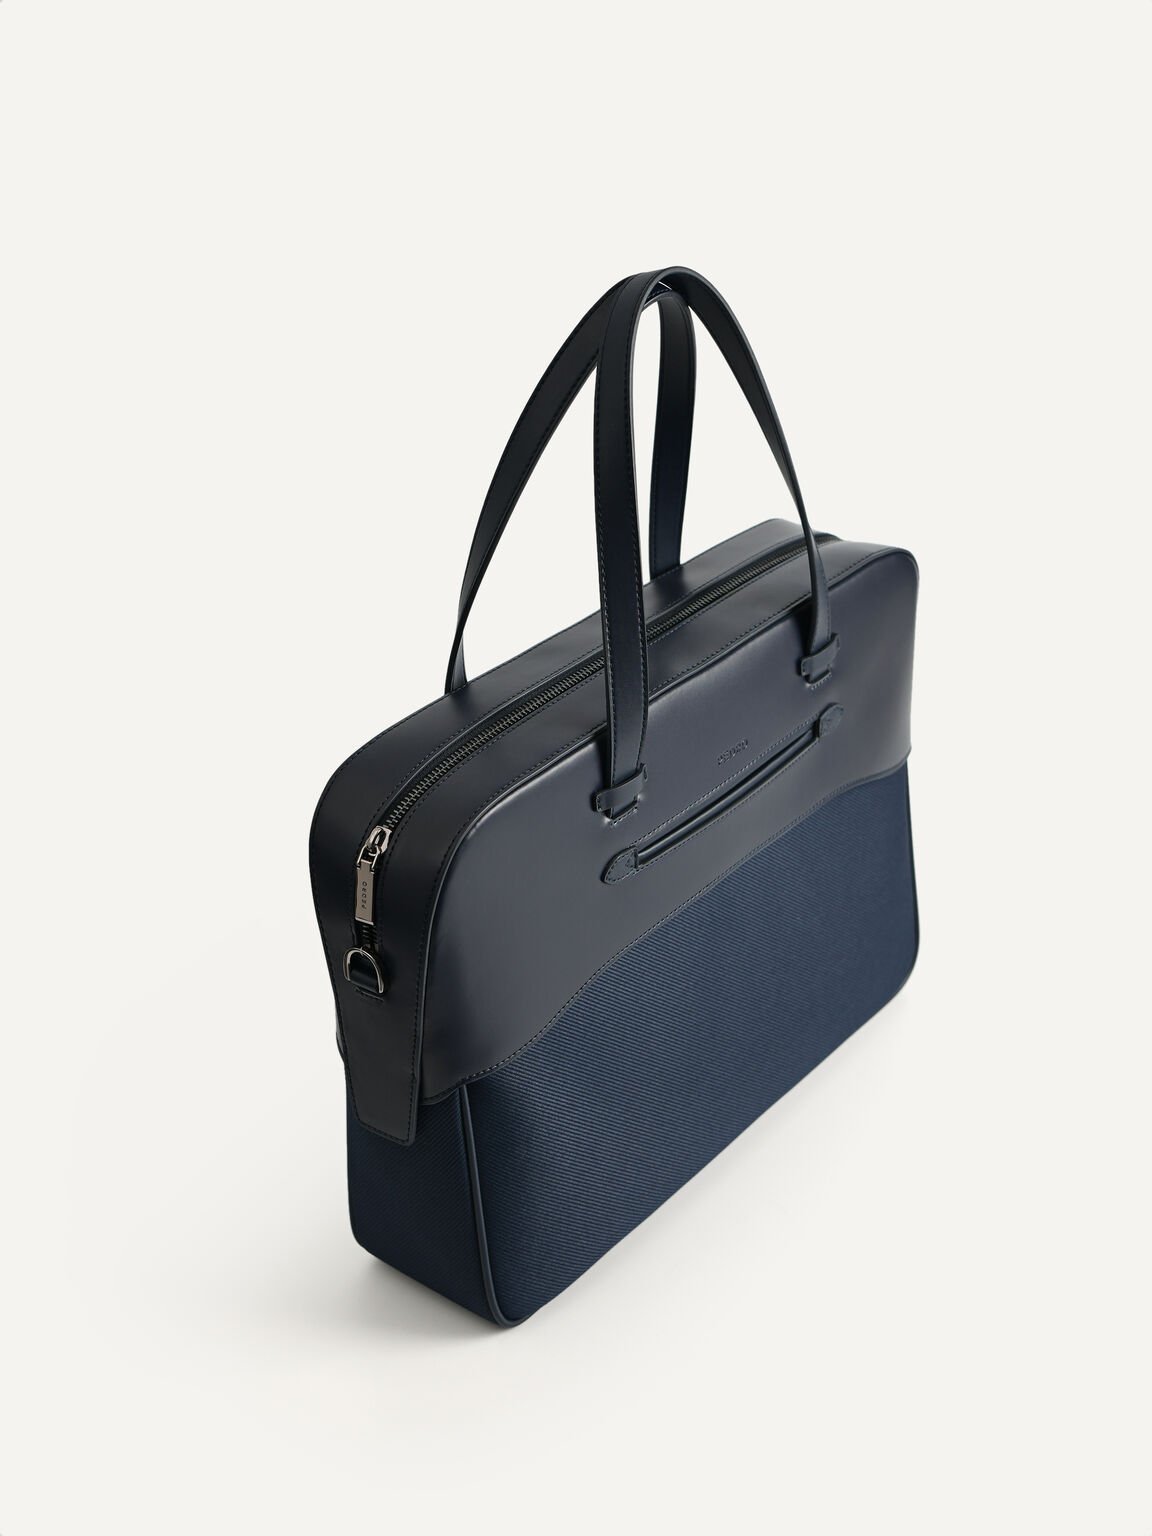 Leather Briefcase, Navy